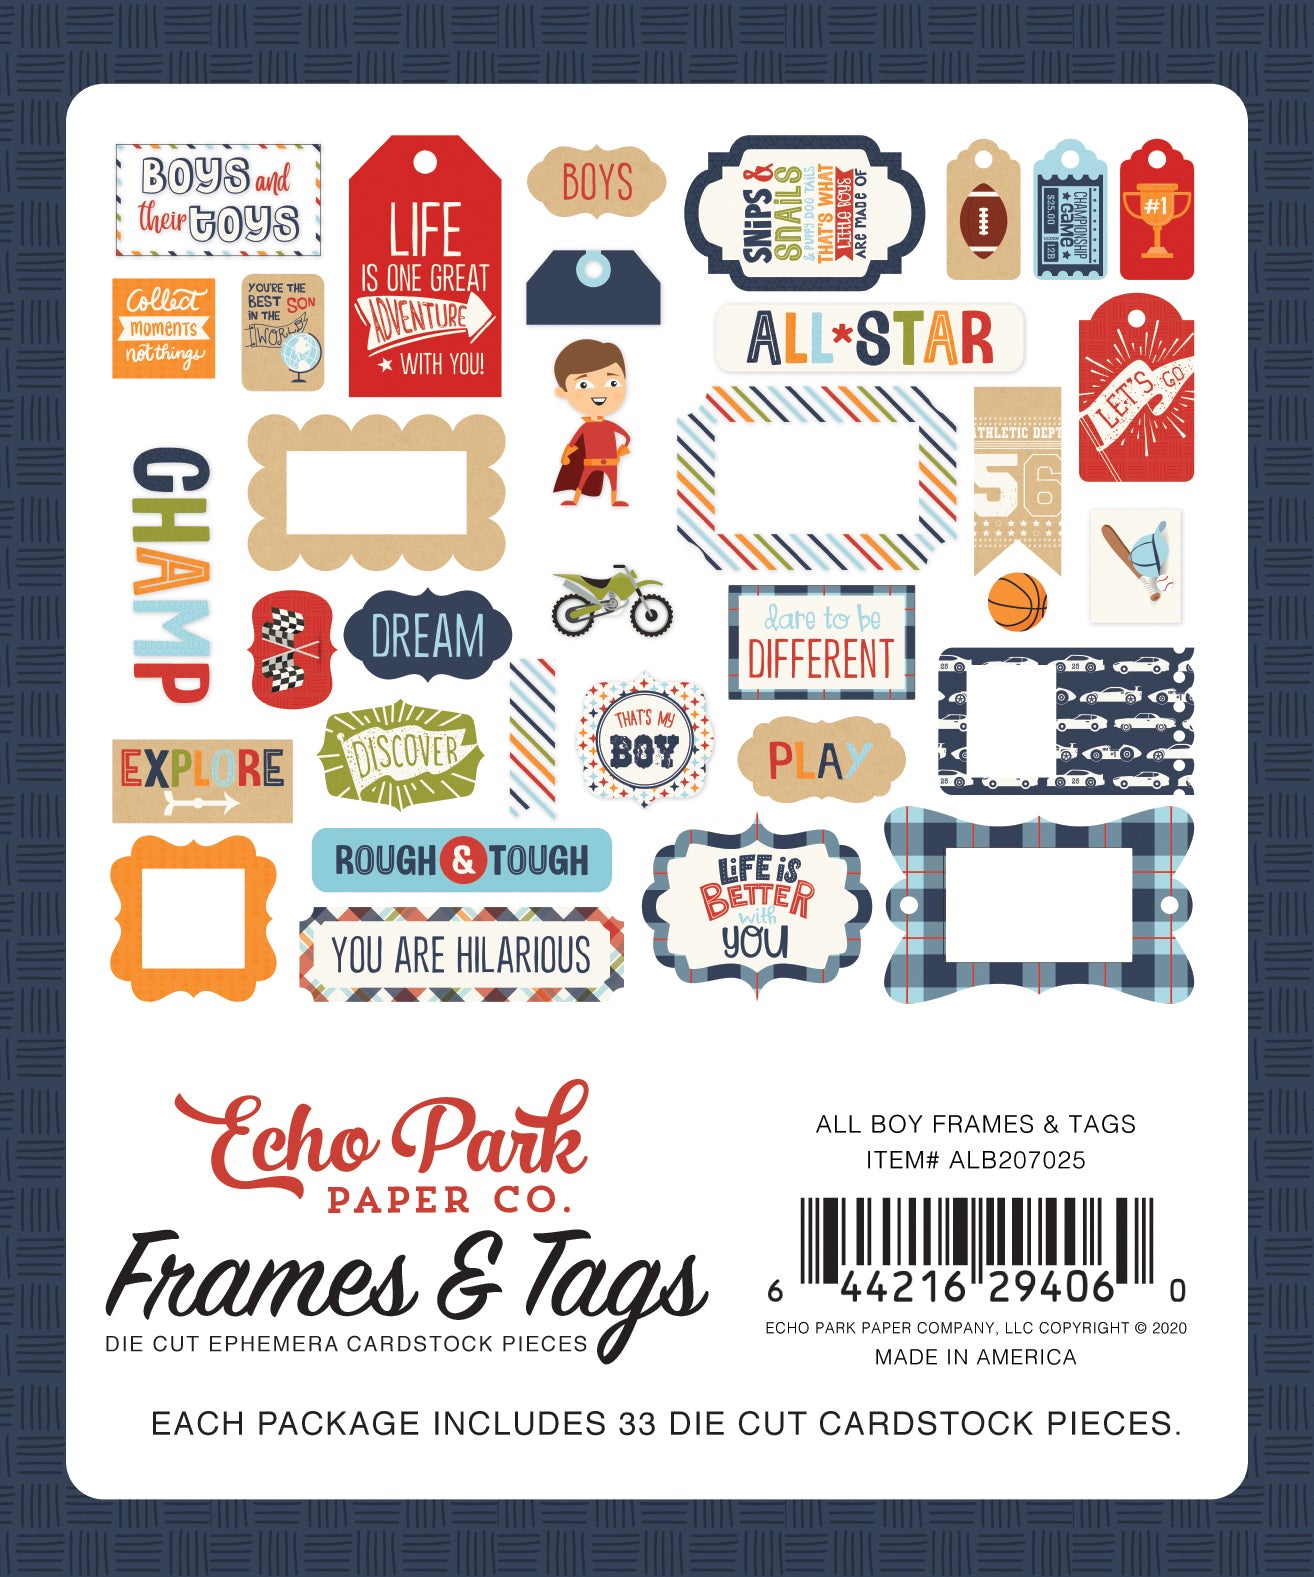 All Boy Frames & Tags Die Cut Cardstock Pack.  Pack includes 33 different die-cut shapes ready to embellish any project.